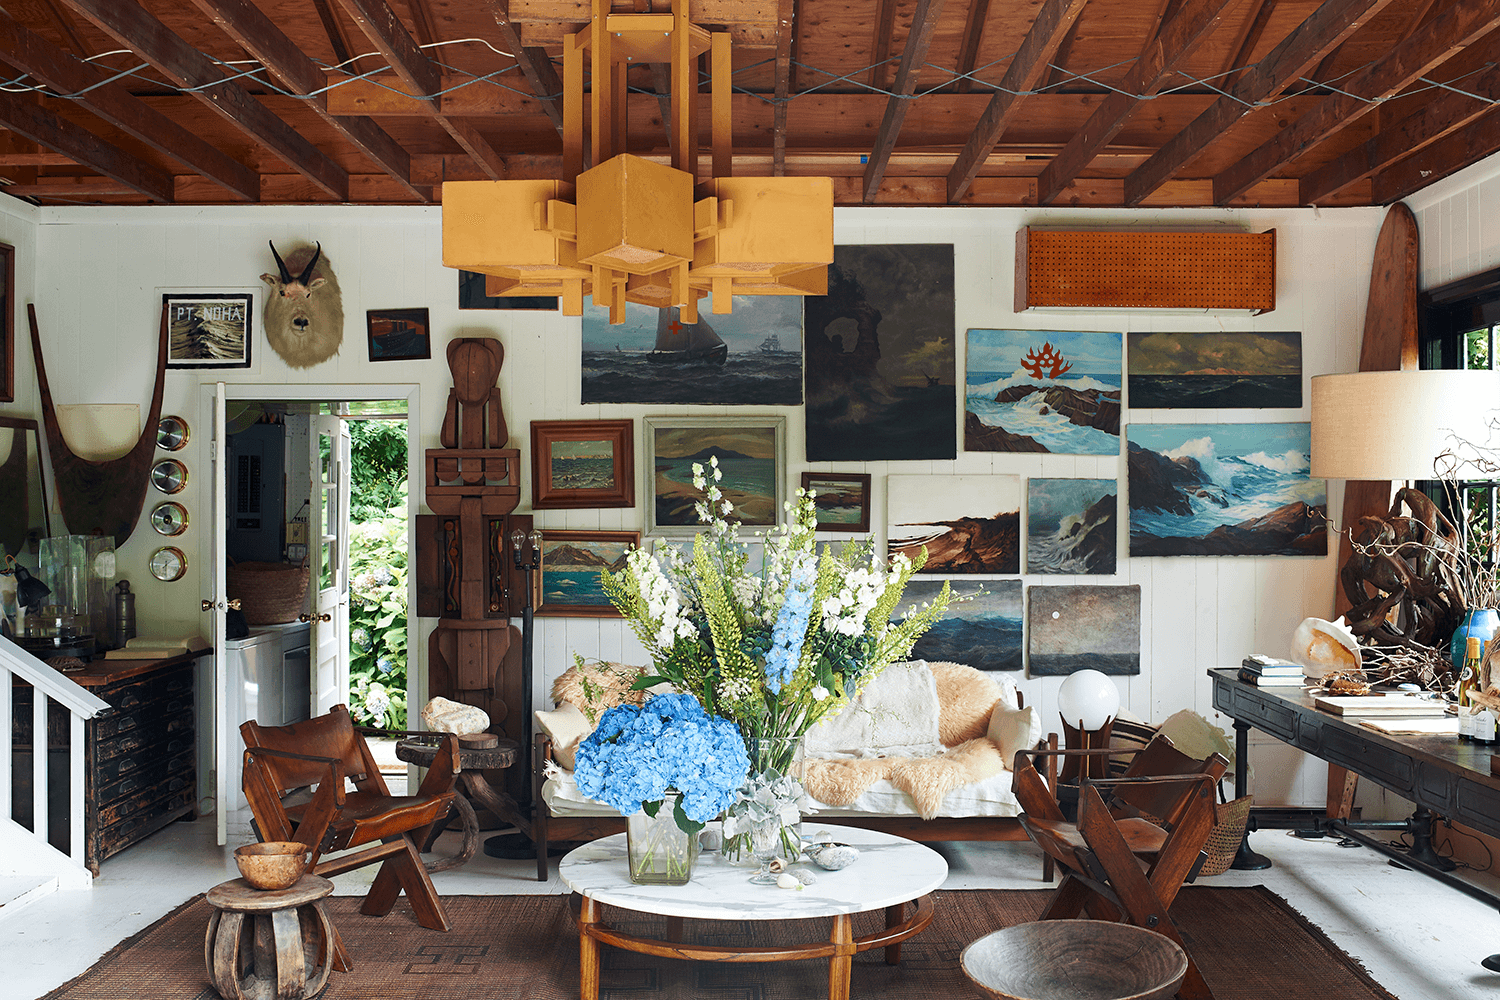 Stephen and Robin’s home studio and workshop in Montauk, NY. Image Credit: Mikkel Vang